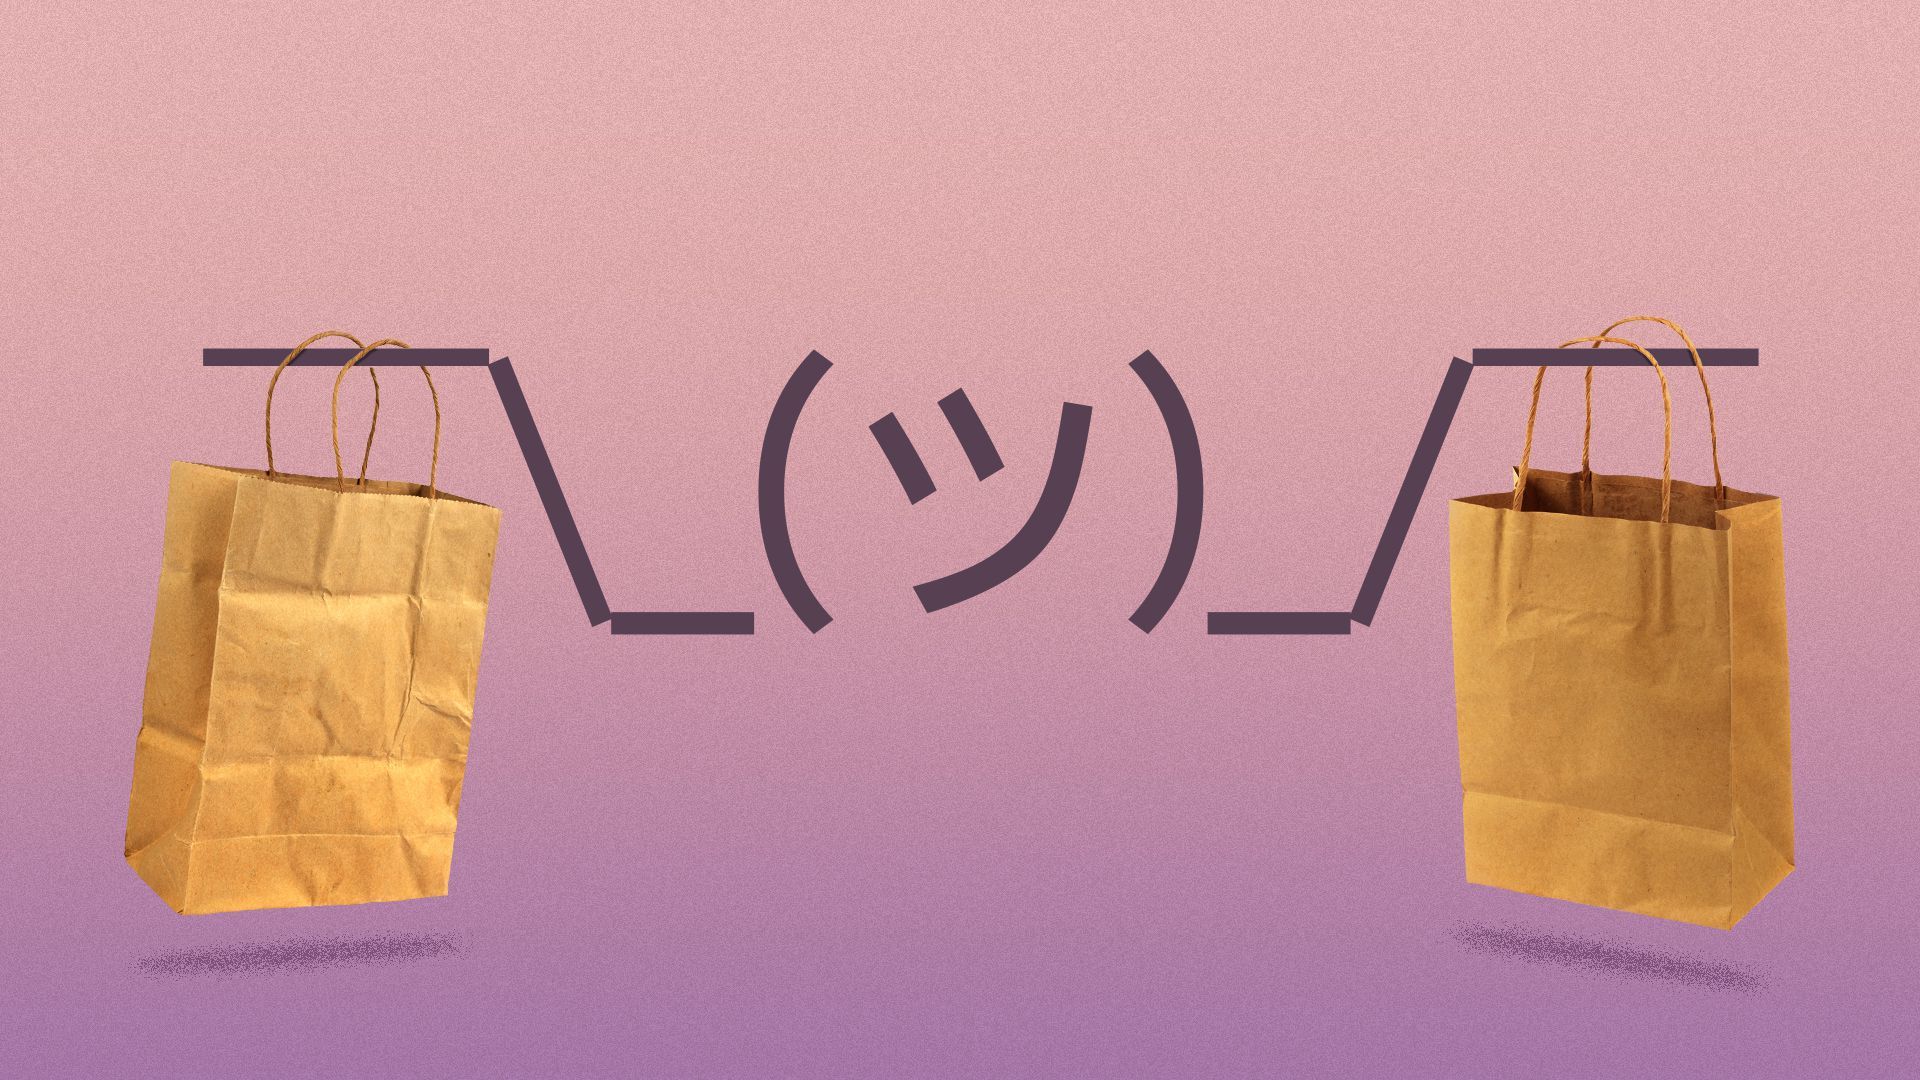 Illustration showing a mixed emotion emoji holding up shopping bags.